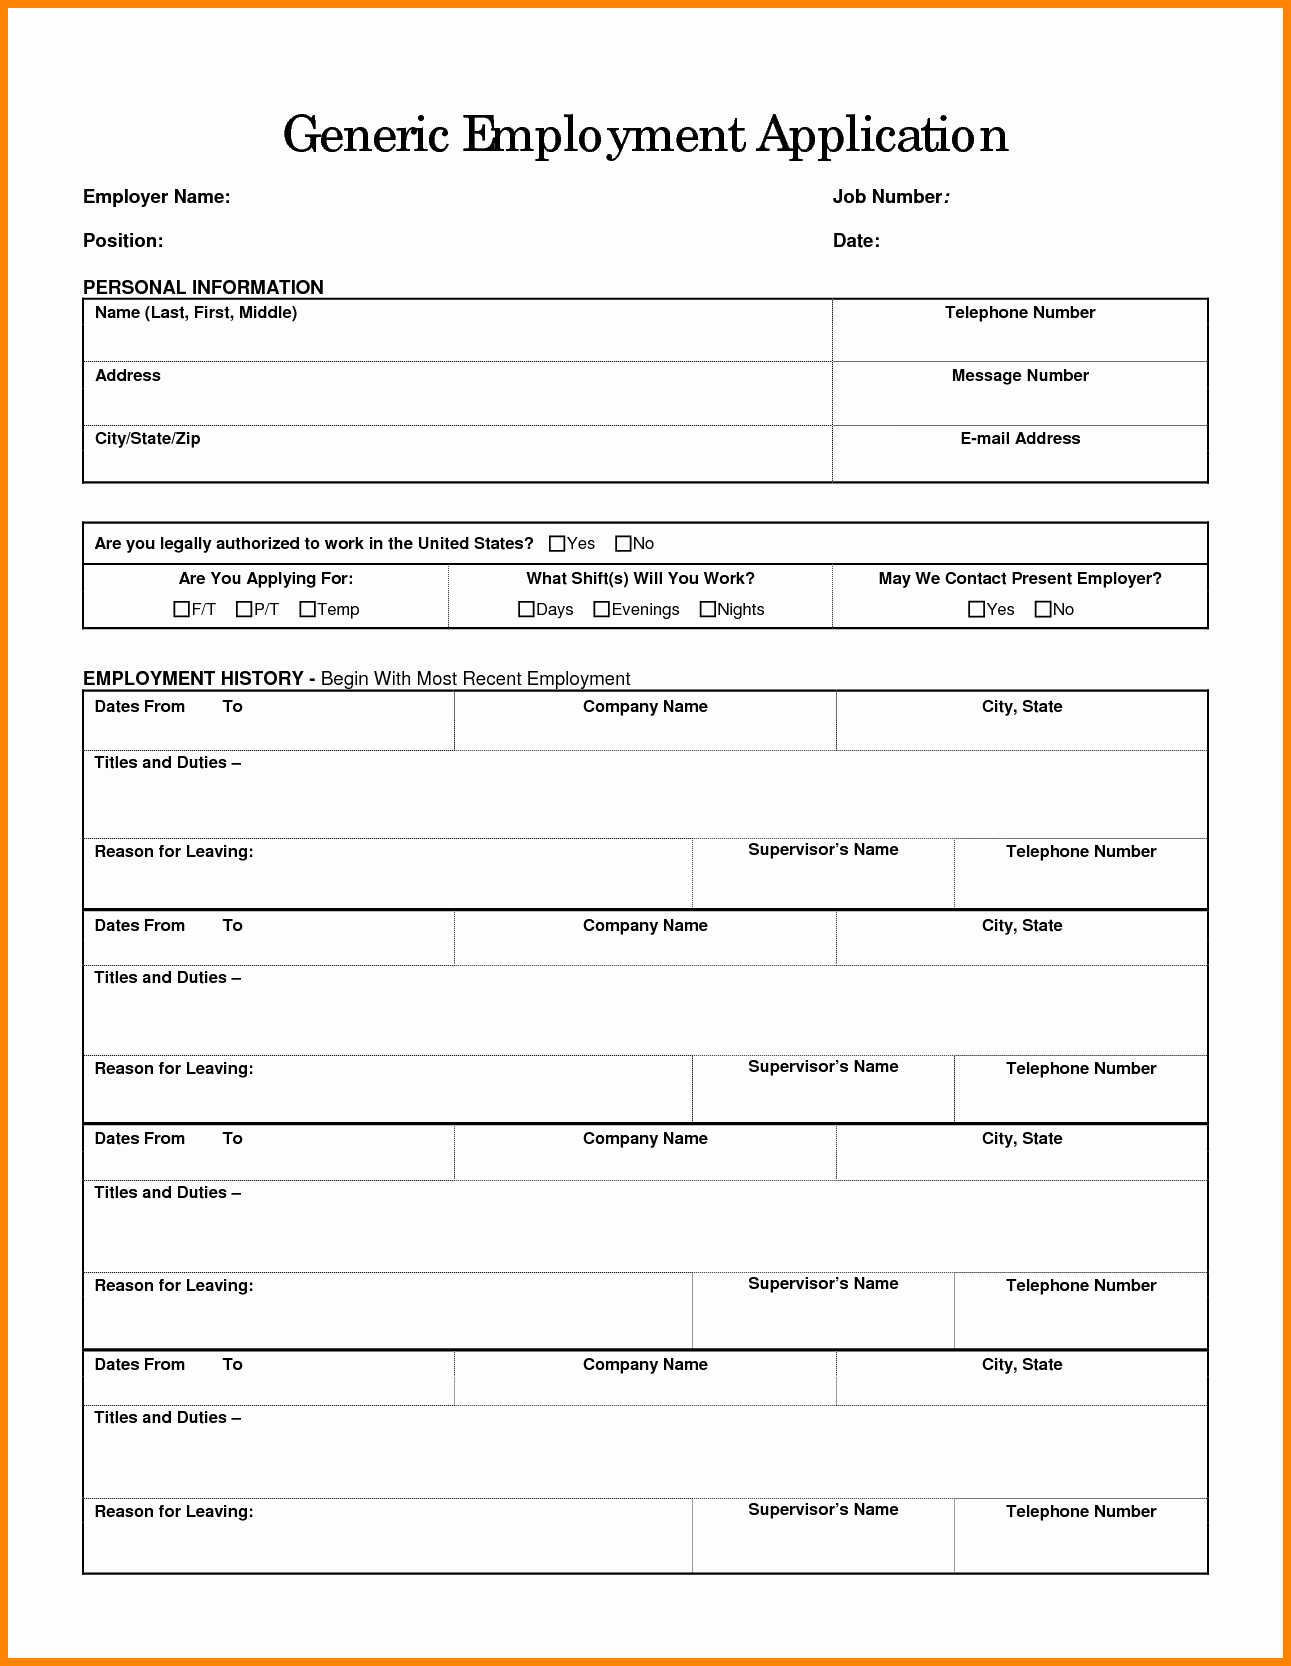 General Application for Employment Template Luxury 14 Job Application Blank form